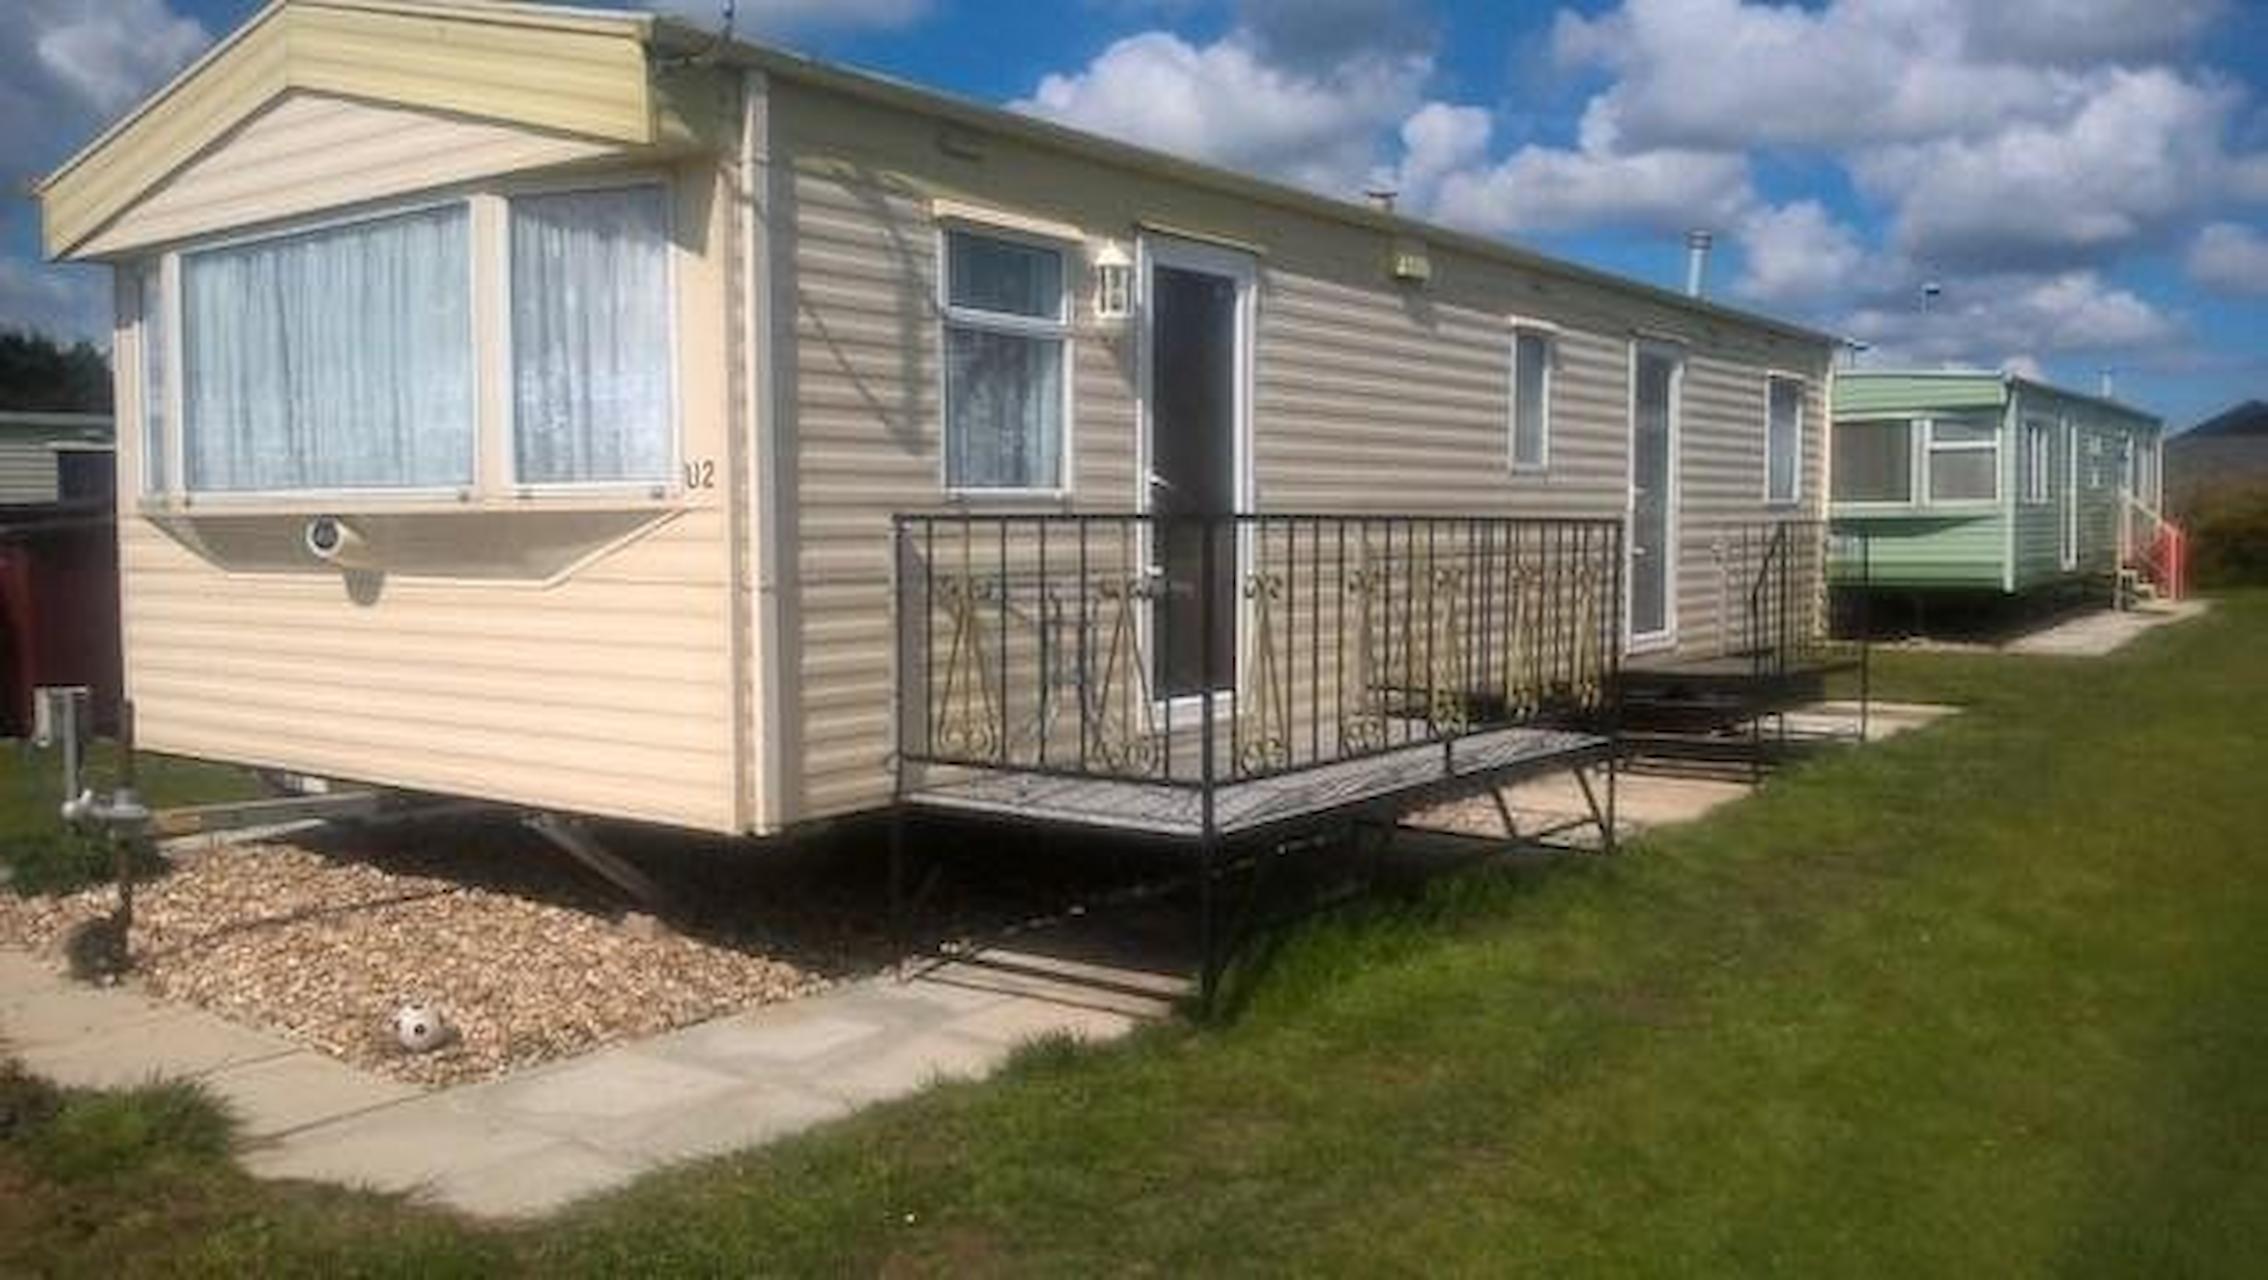 What Are The Benefits Of Buying A Static Caravan?